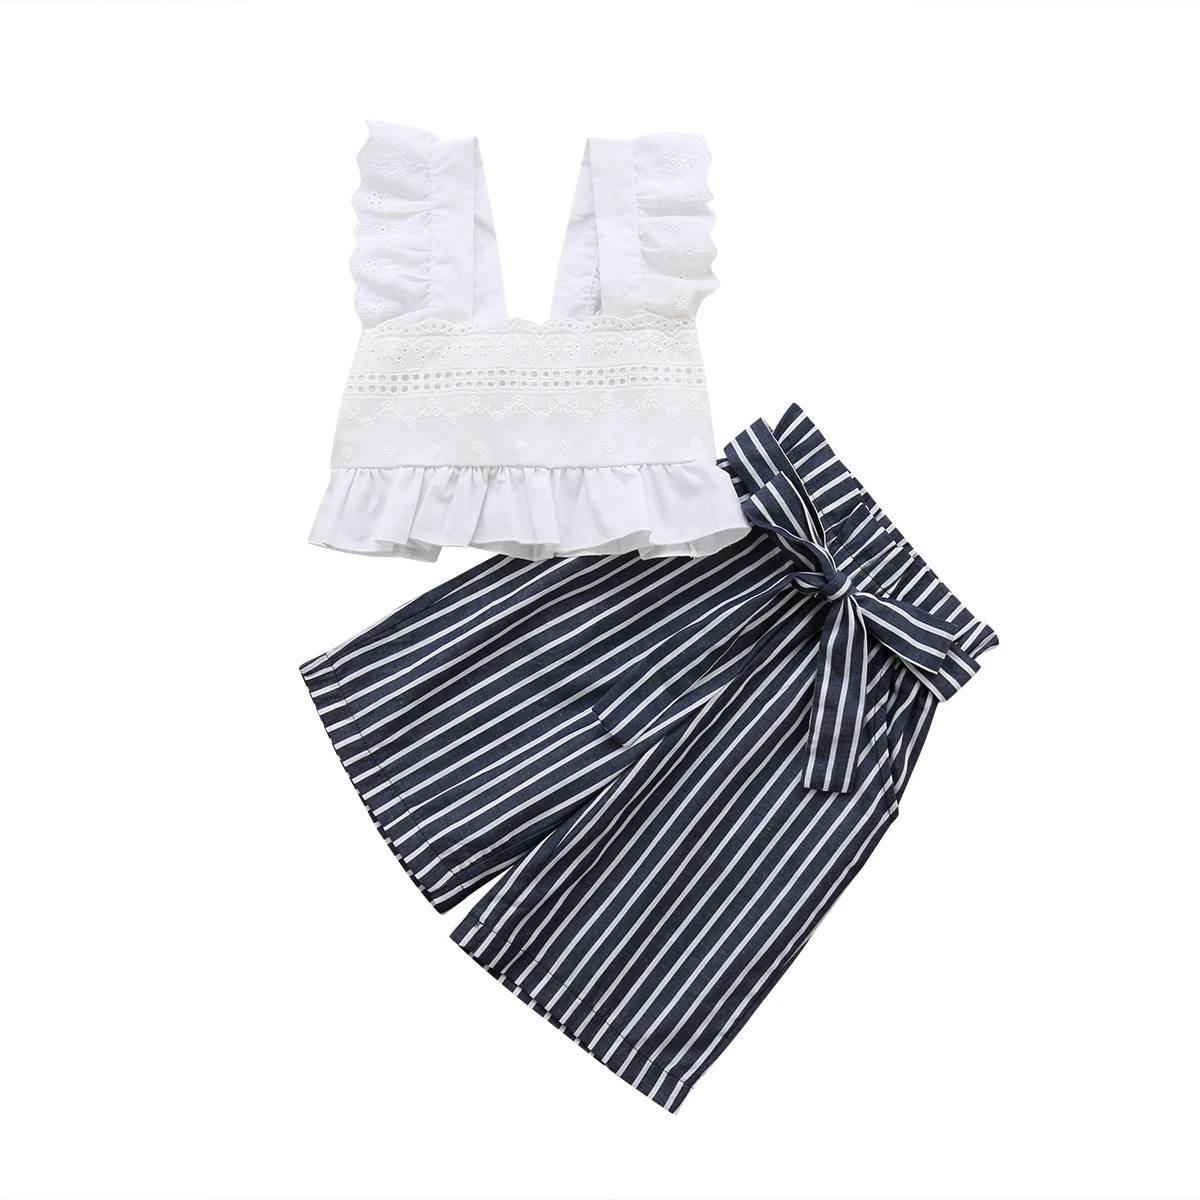 Pudcoco Toddler Kids Baby Girls Clothing Lace Party Striped Crop Tops Vest Pants Cute 2pcs Bow Clothes Summer Girl 1-6T